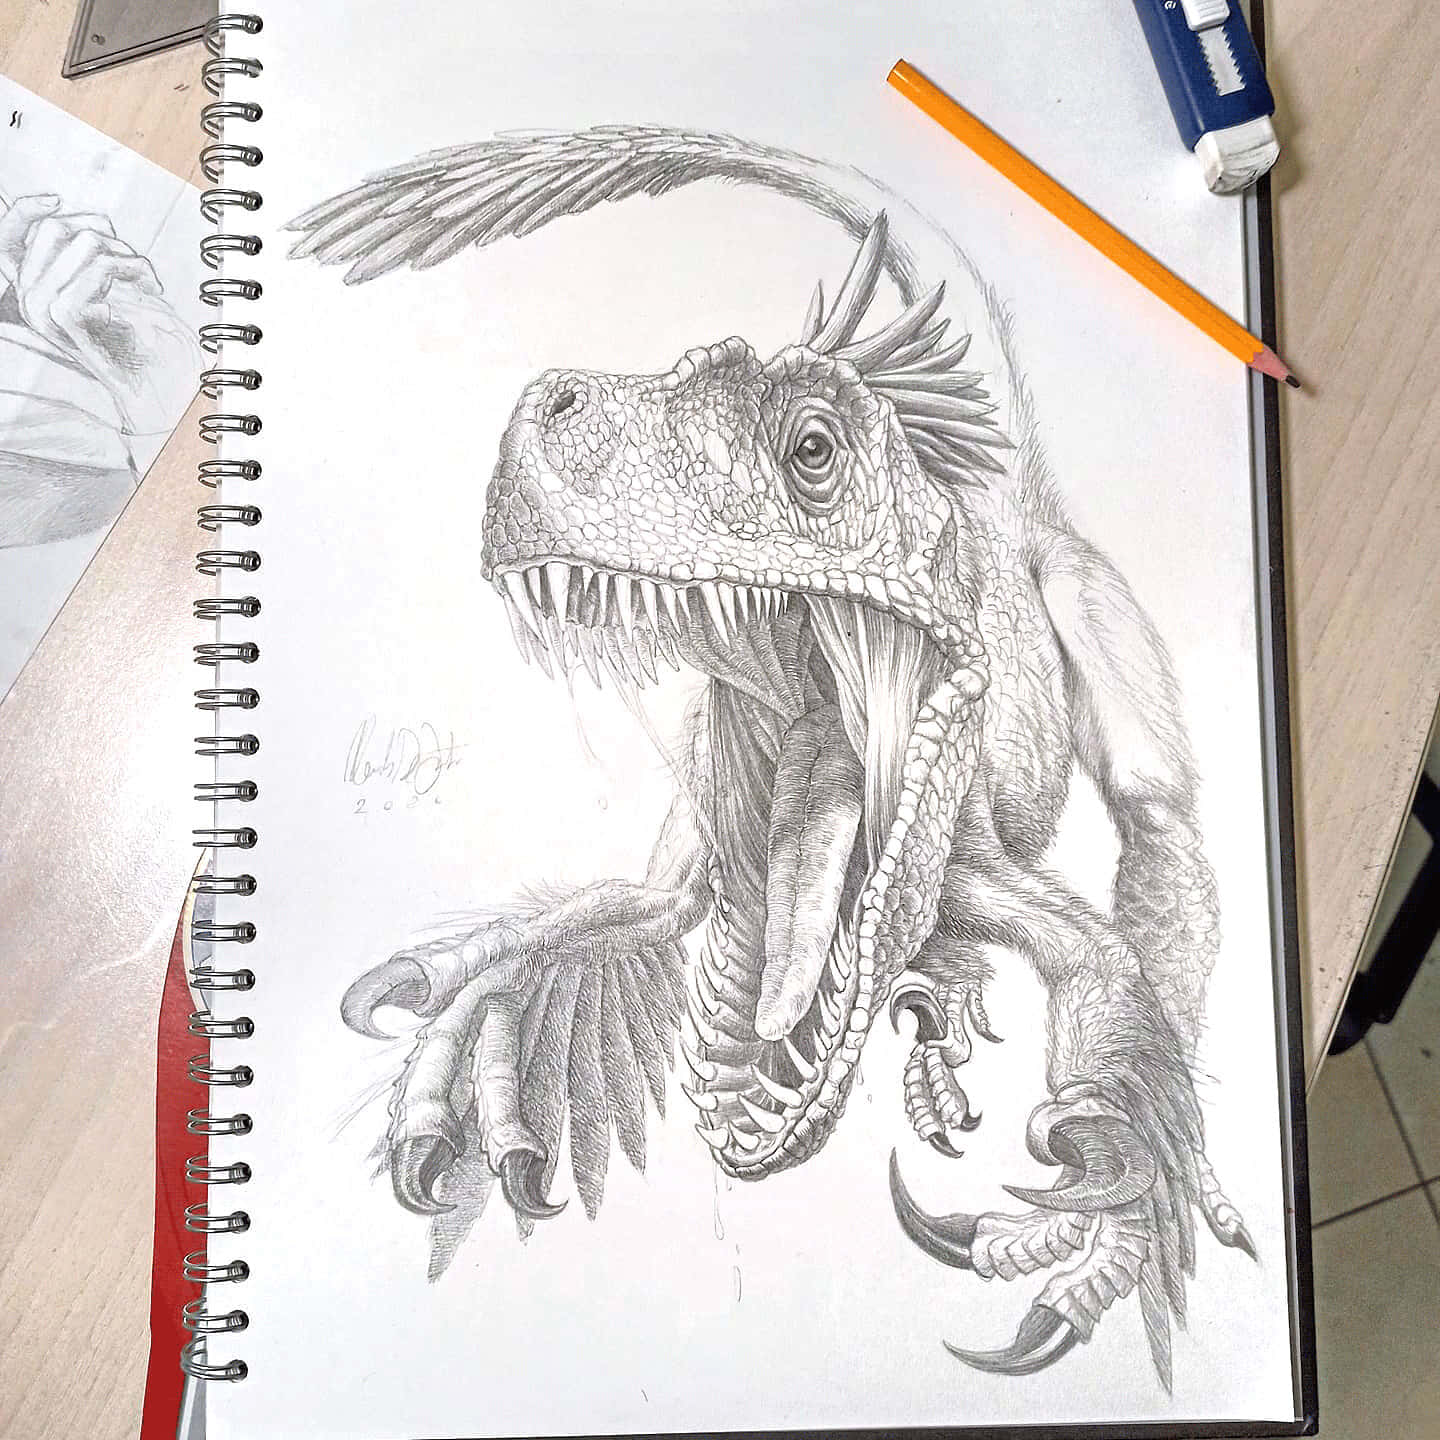 How To Draw Dinosaur With Gel Pen/Dinosaur drawing/black pencil shading -  YouTube